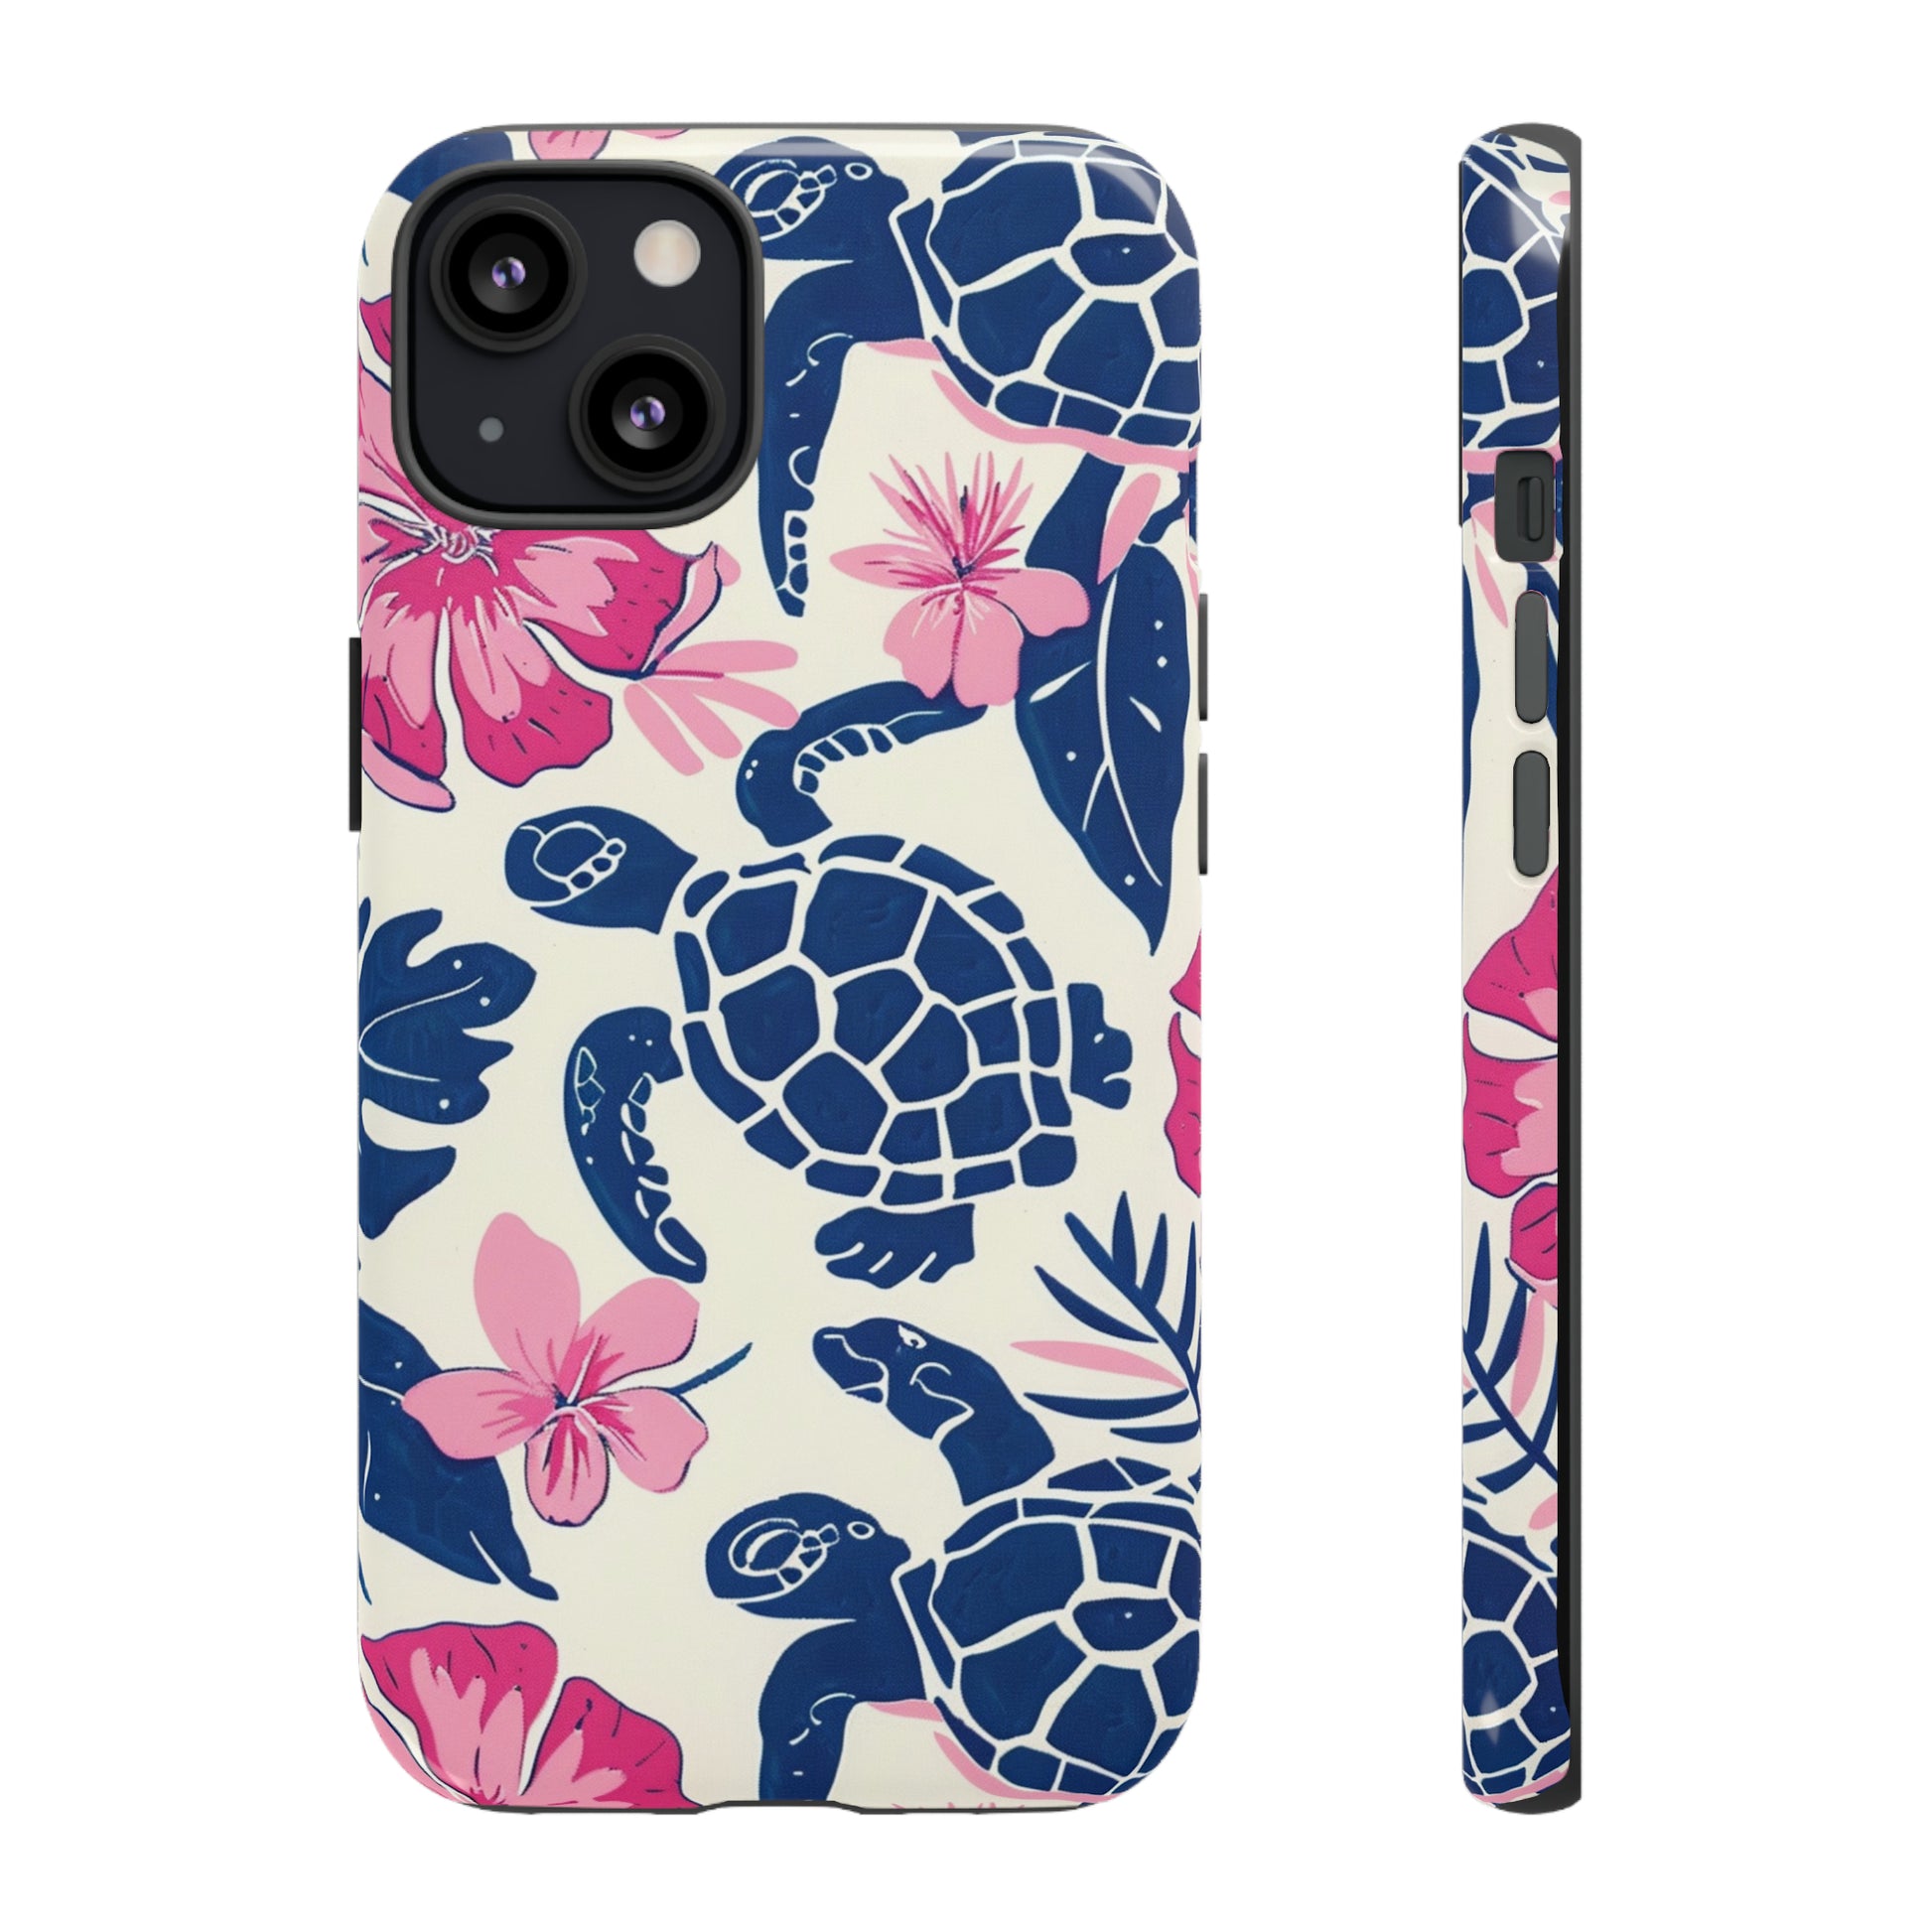 Blue Sea Turtle Phone Case with Flowers